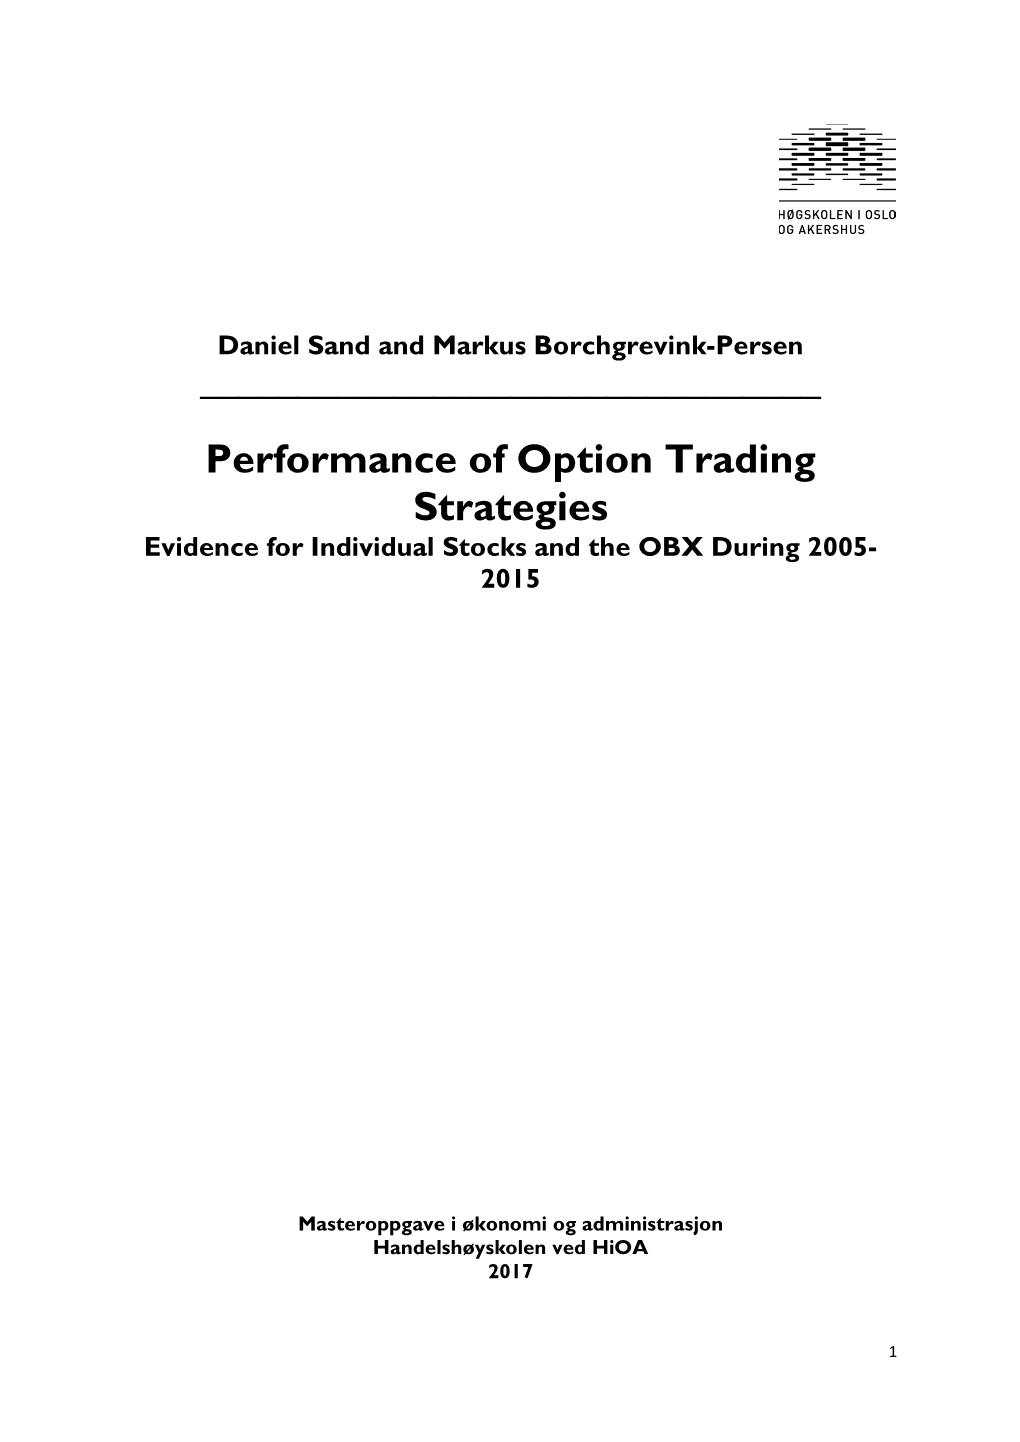 Performance of Option Trading Strategies Evidence for Individual Stocks and the OBX During 2005- 2015